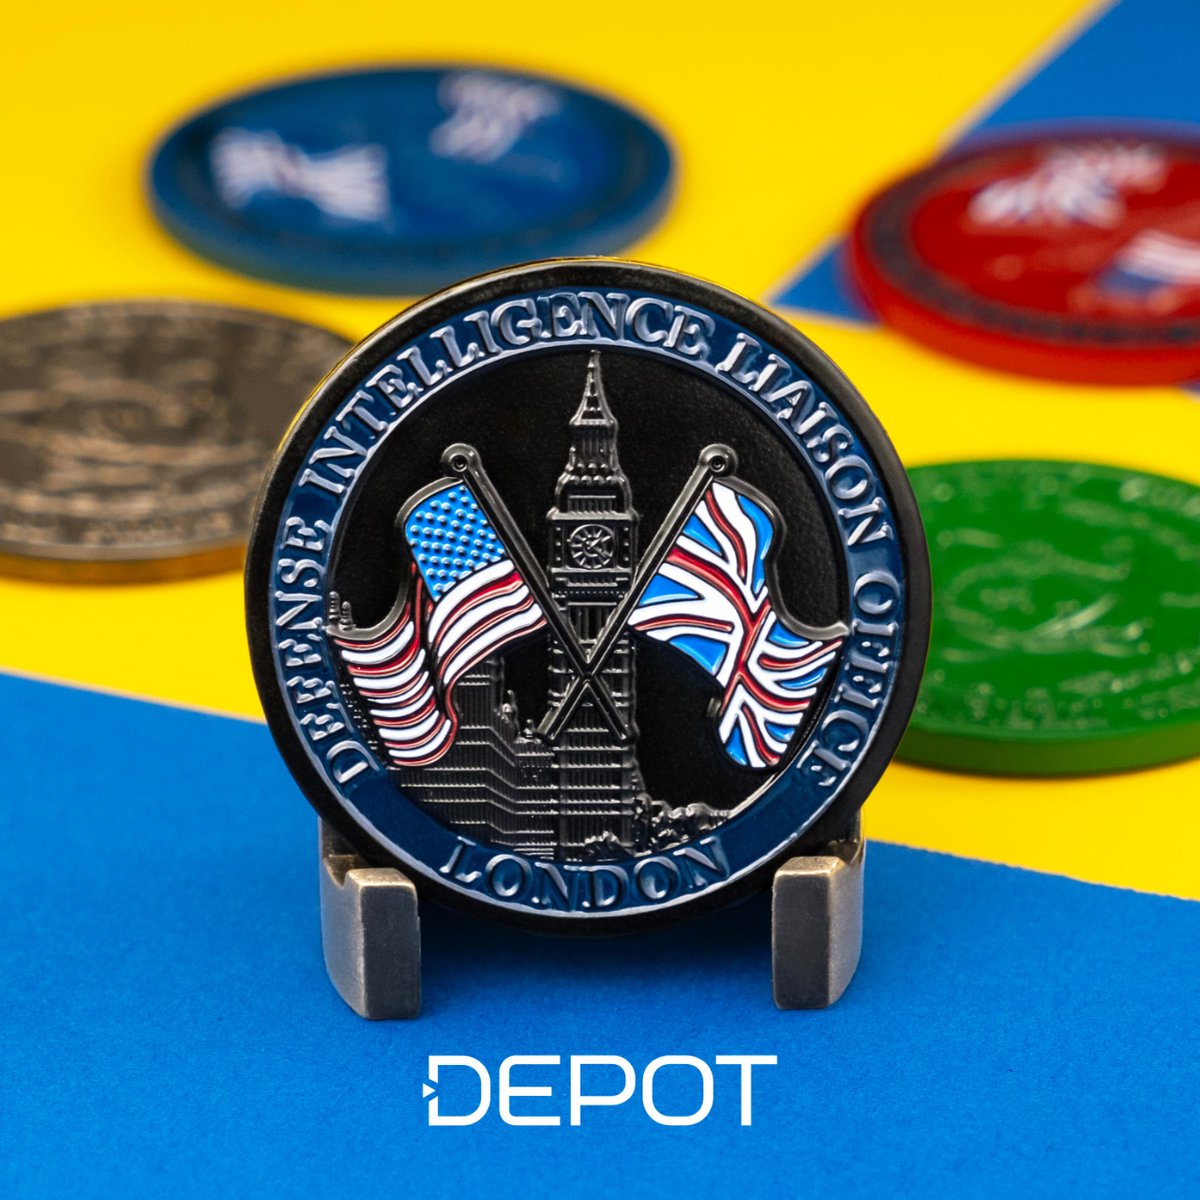 Did you know we also make military challenge coins? Send us your ideas and let our artists handle the rest!
.
.
.
.
.
.
#pindepot #coindepot #depot #military #army #airforce #marines #soldier #usmc #navy #veteran #veterans